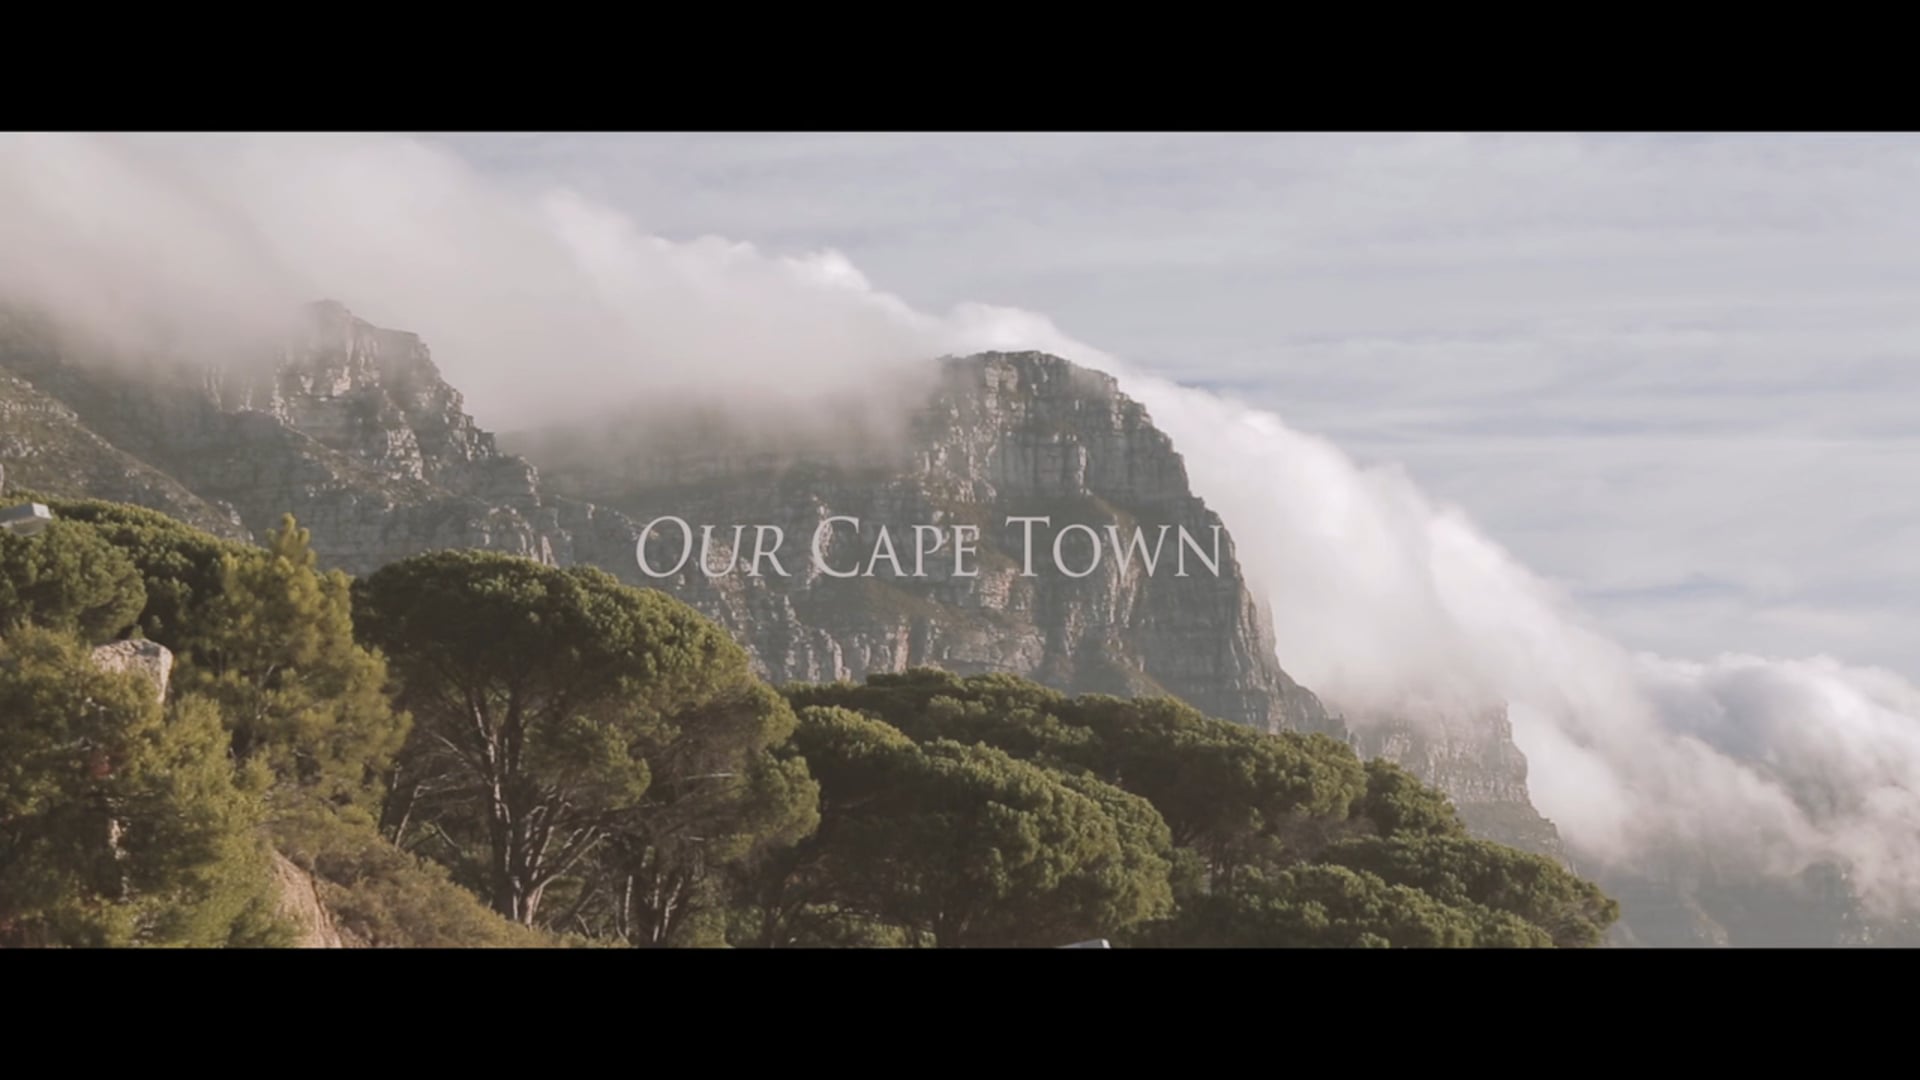 Our Cape Town